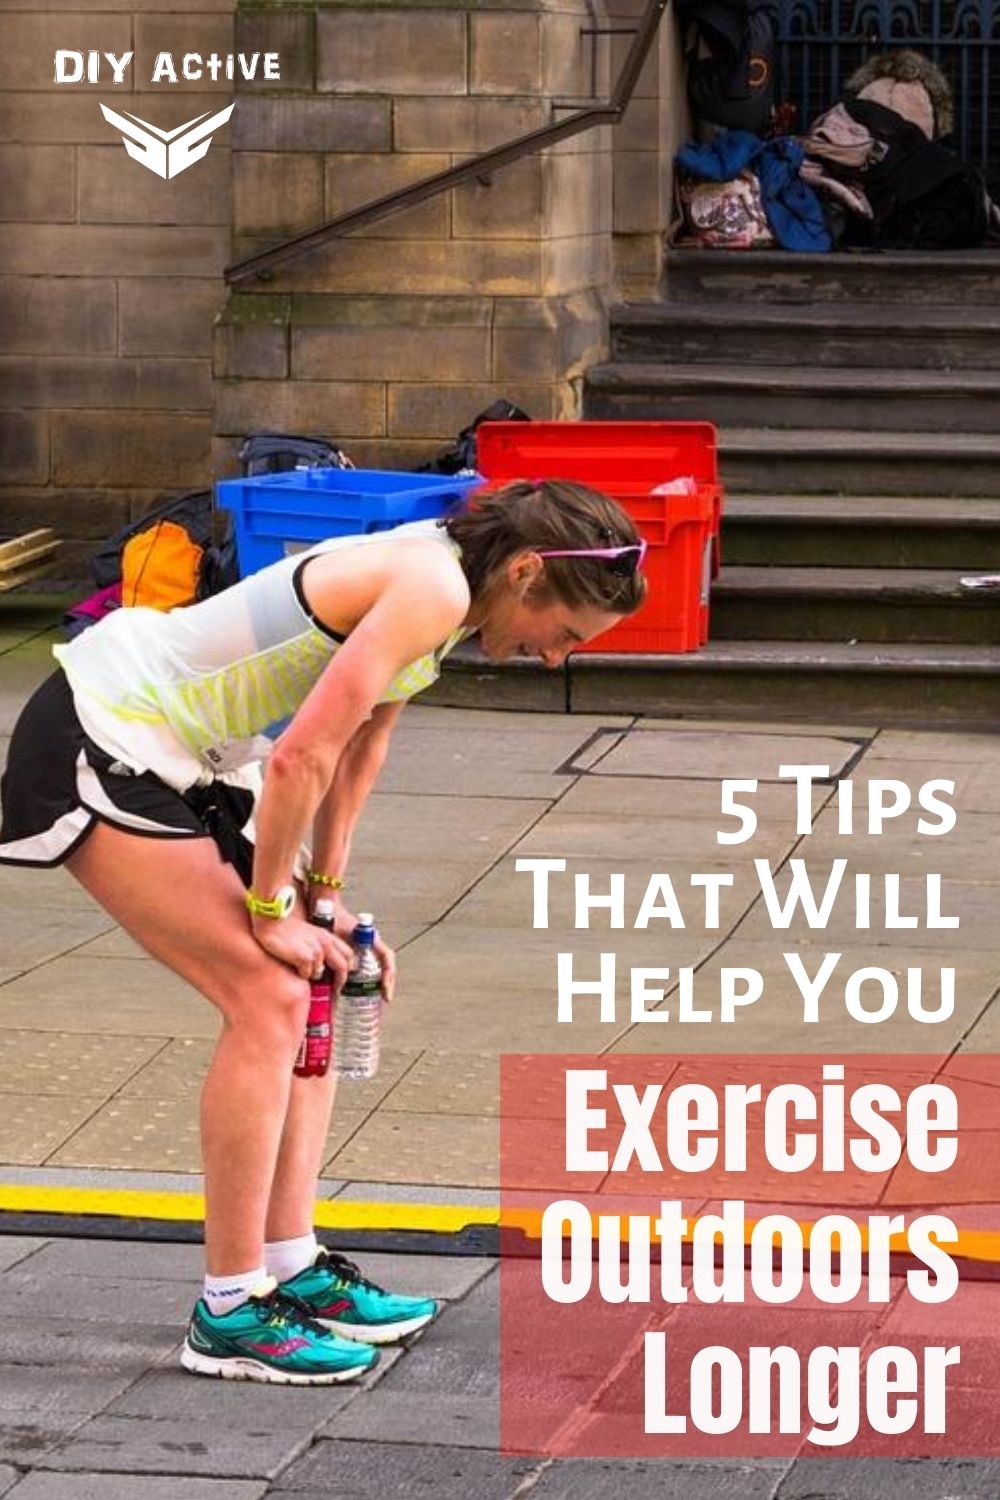 5 Tips That Will Help You Exercise Outdoors Longer